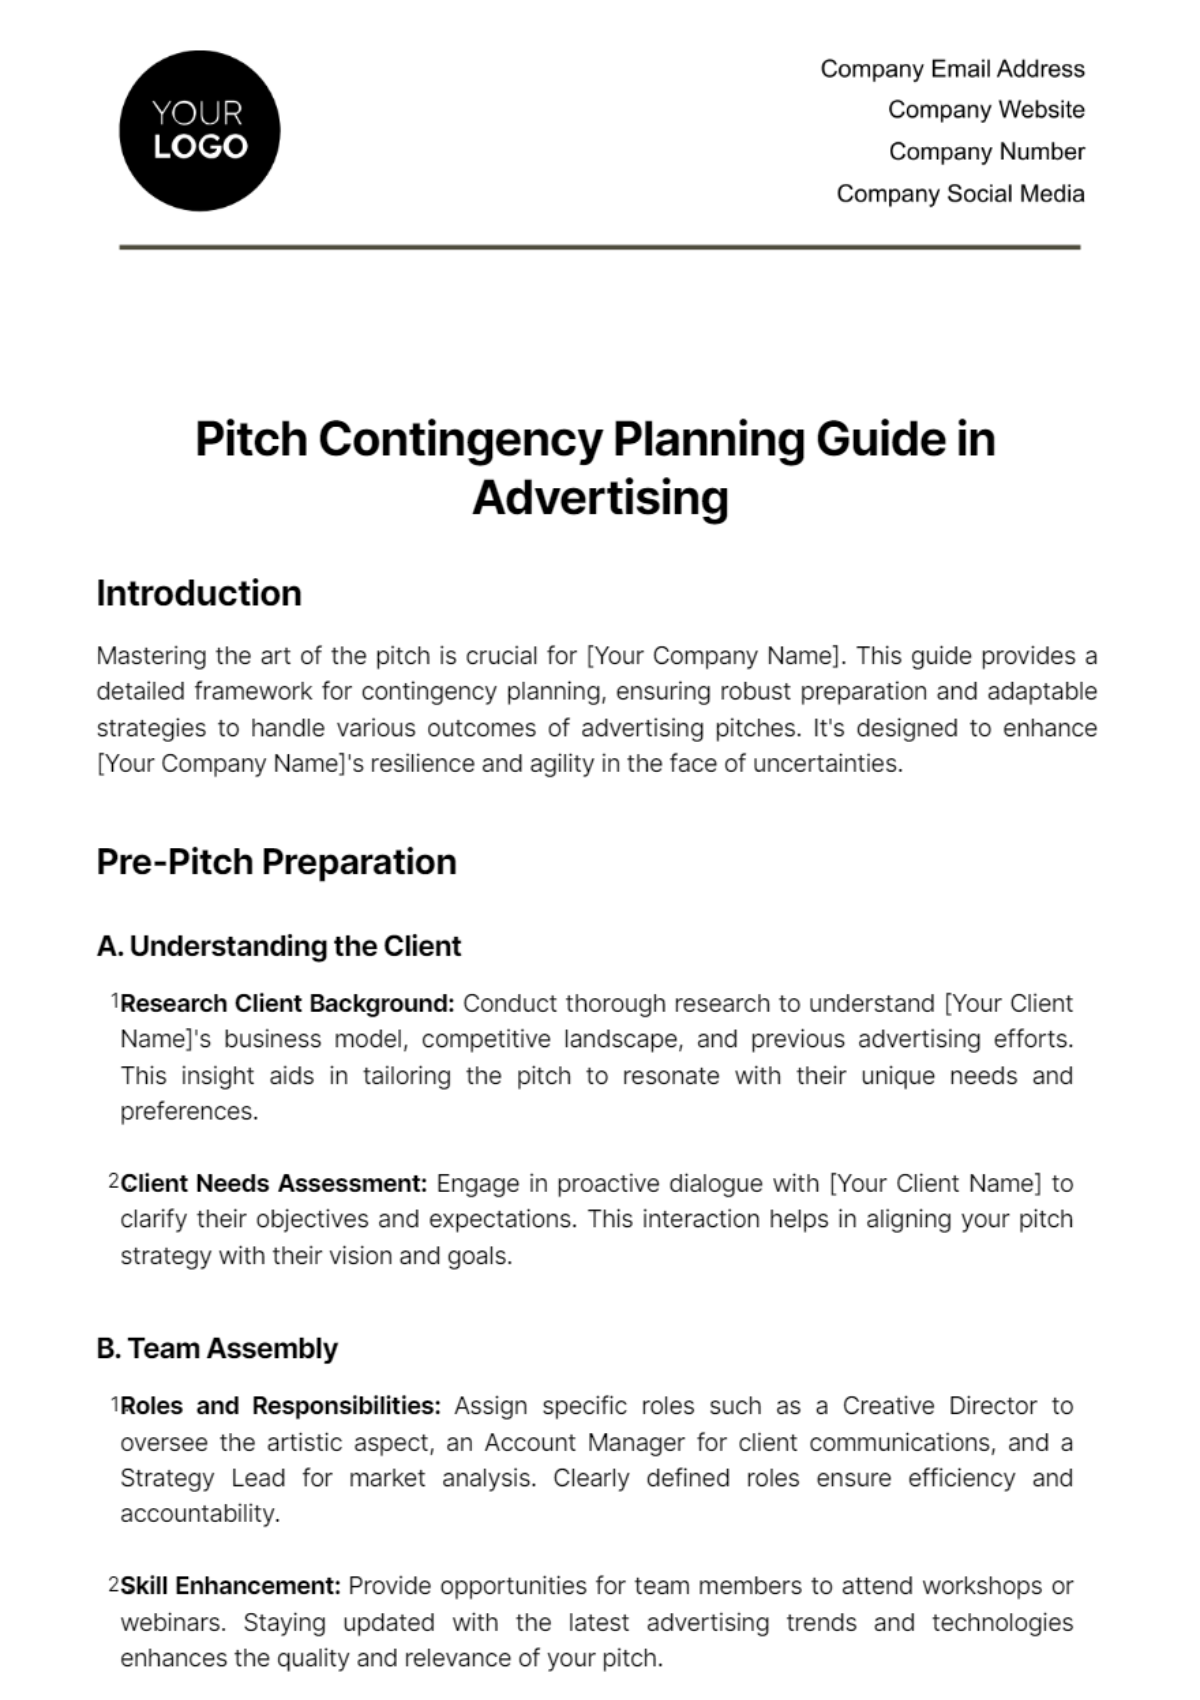 Free Pitch Contingency Planning Guide in Advertising Template